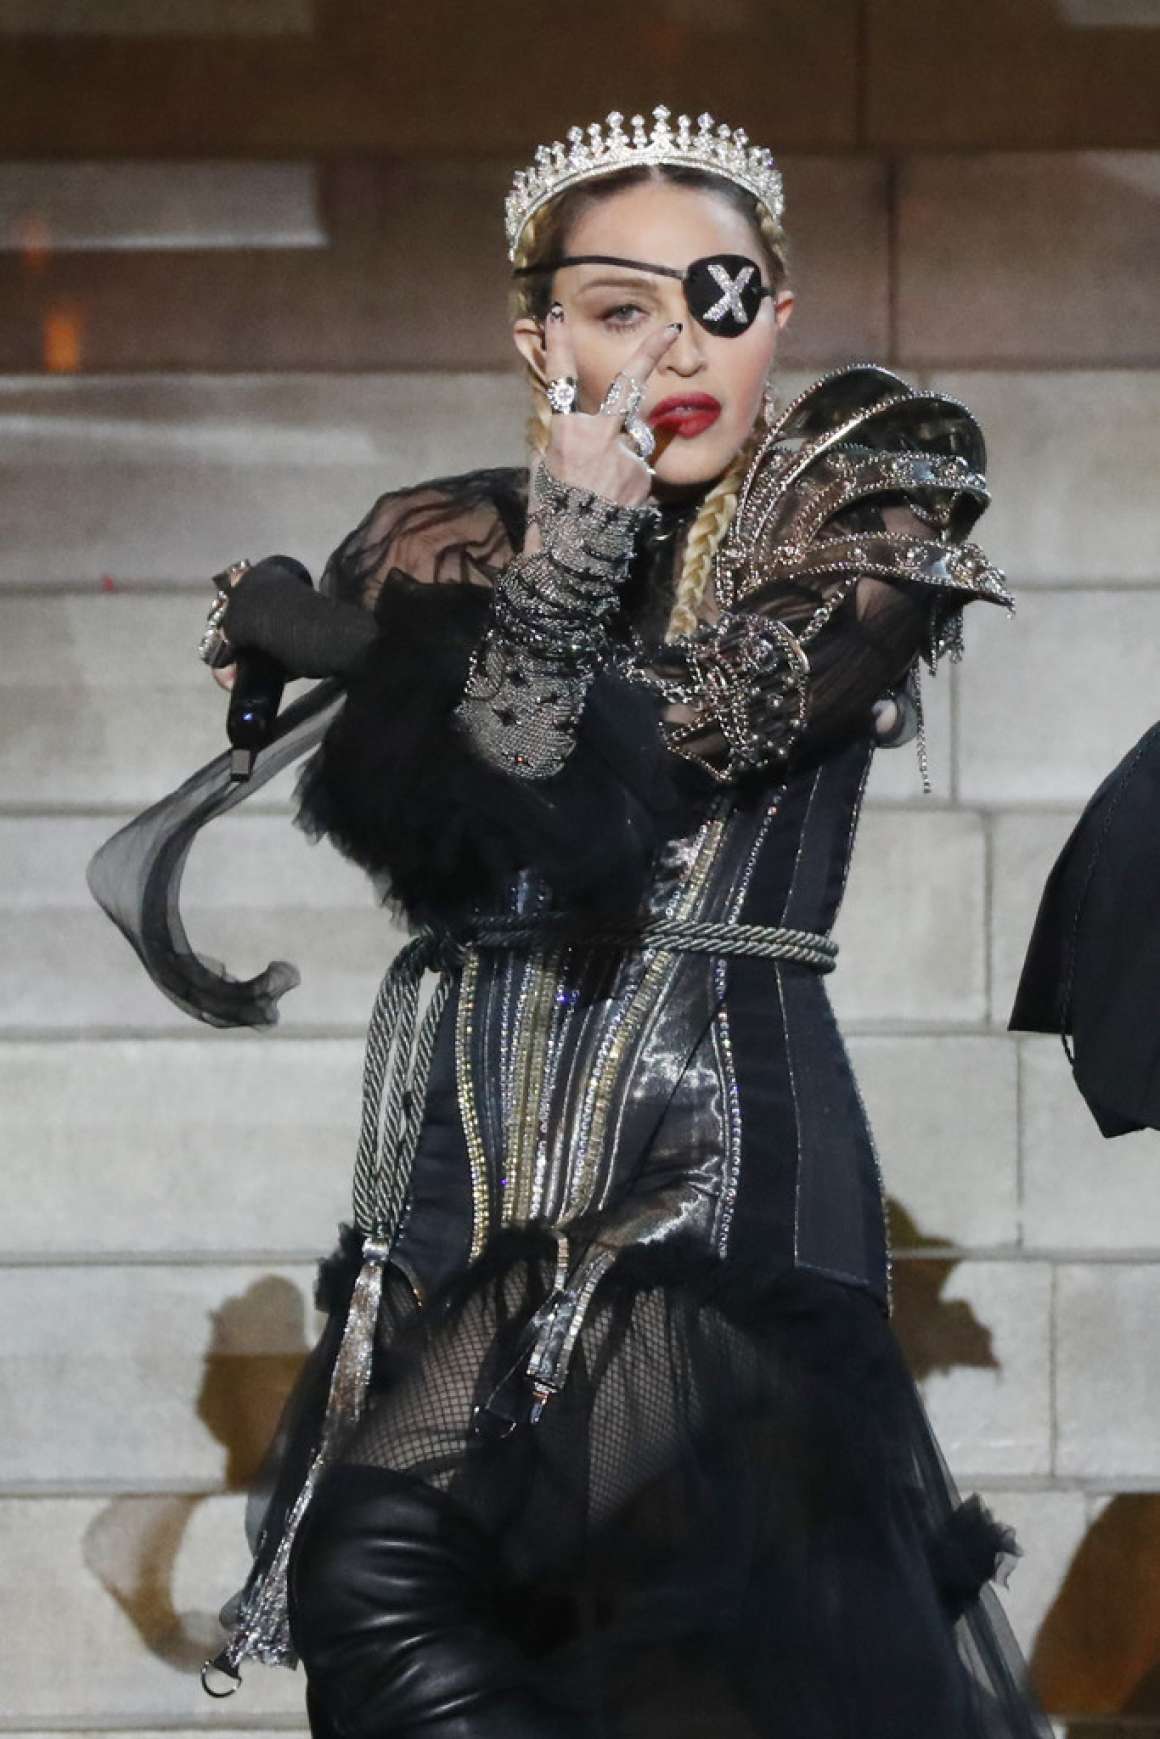 Madonna - Performs at 2019 Eurovision Song Contest in Tel Aviv